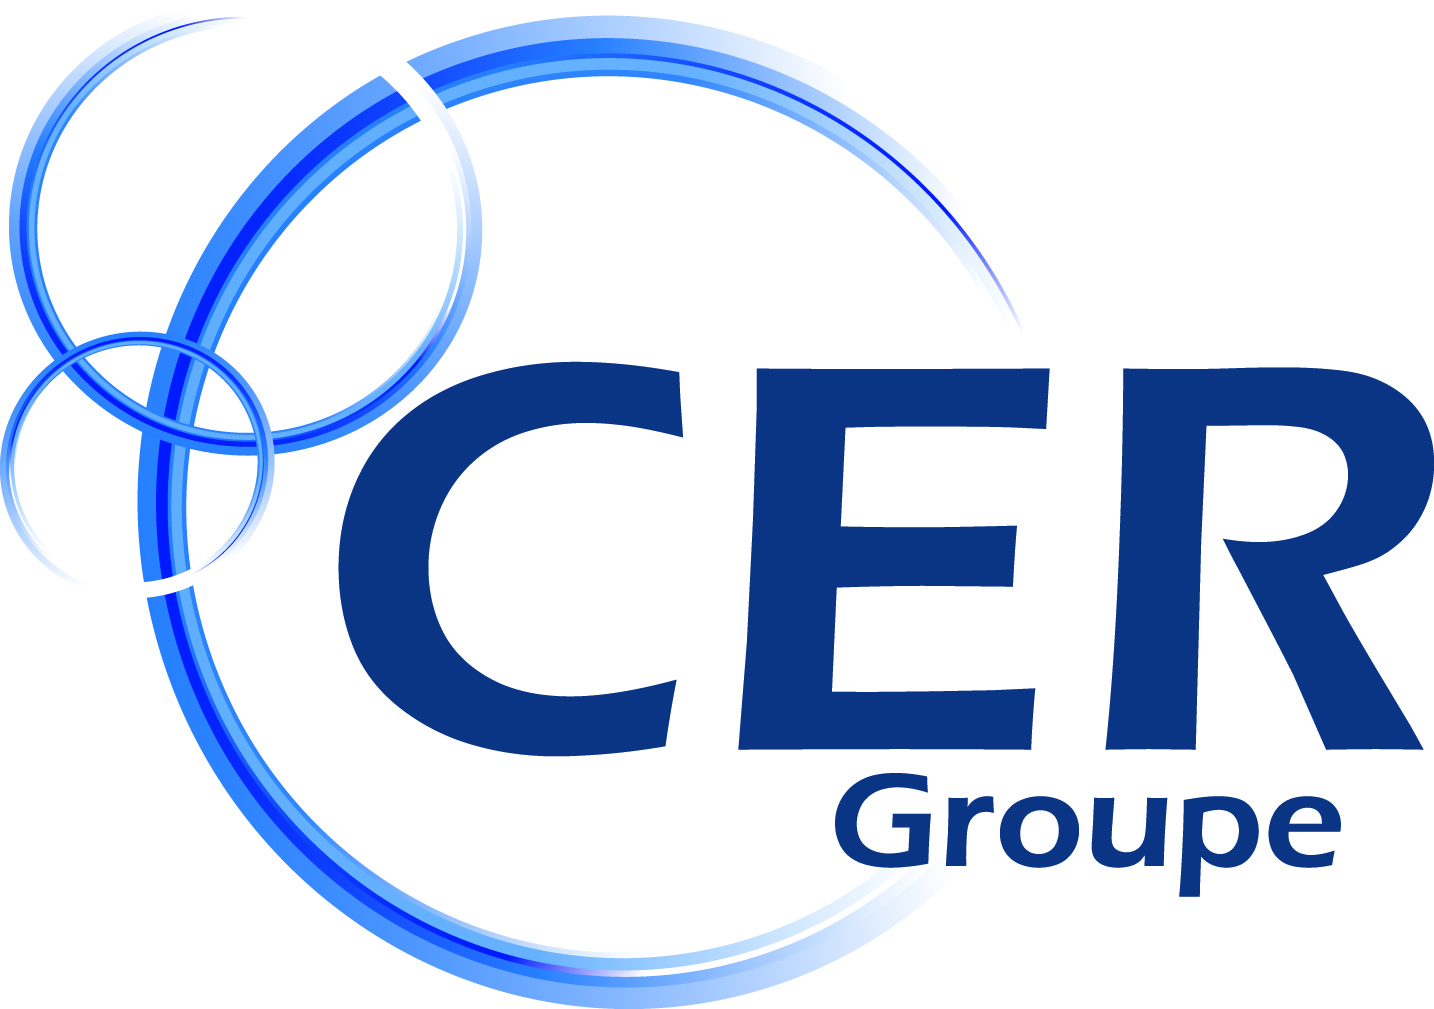 Cer Groupe Biowin